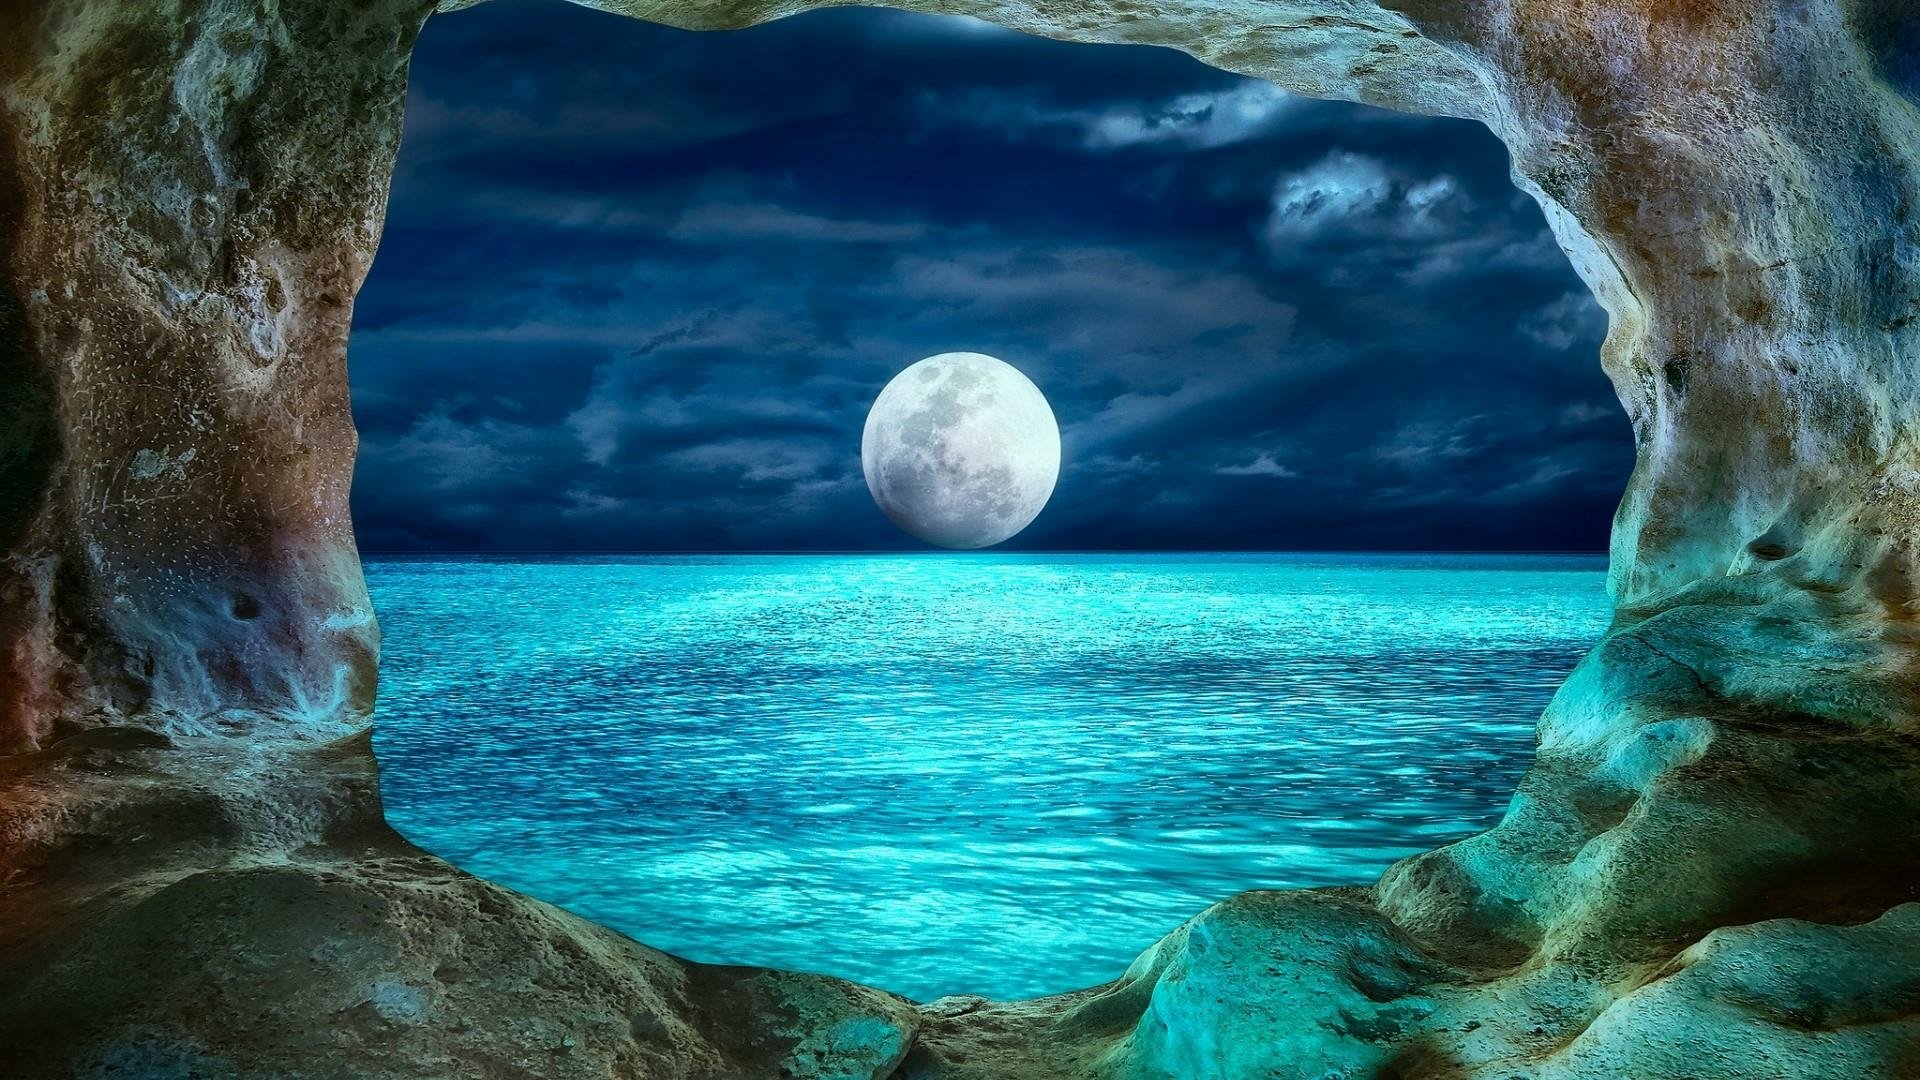 View Of Full Moon From Ocean Cave Hd Wallpaper Background Image